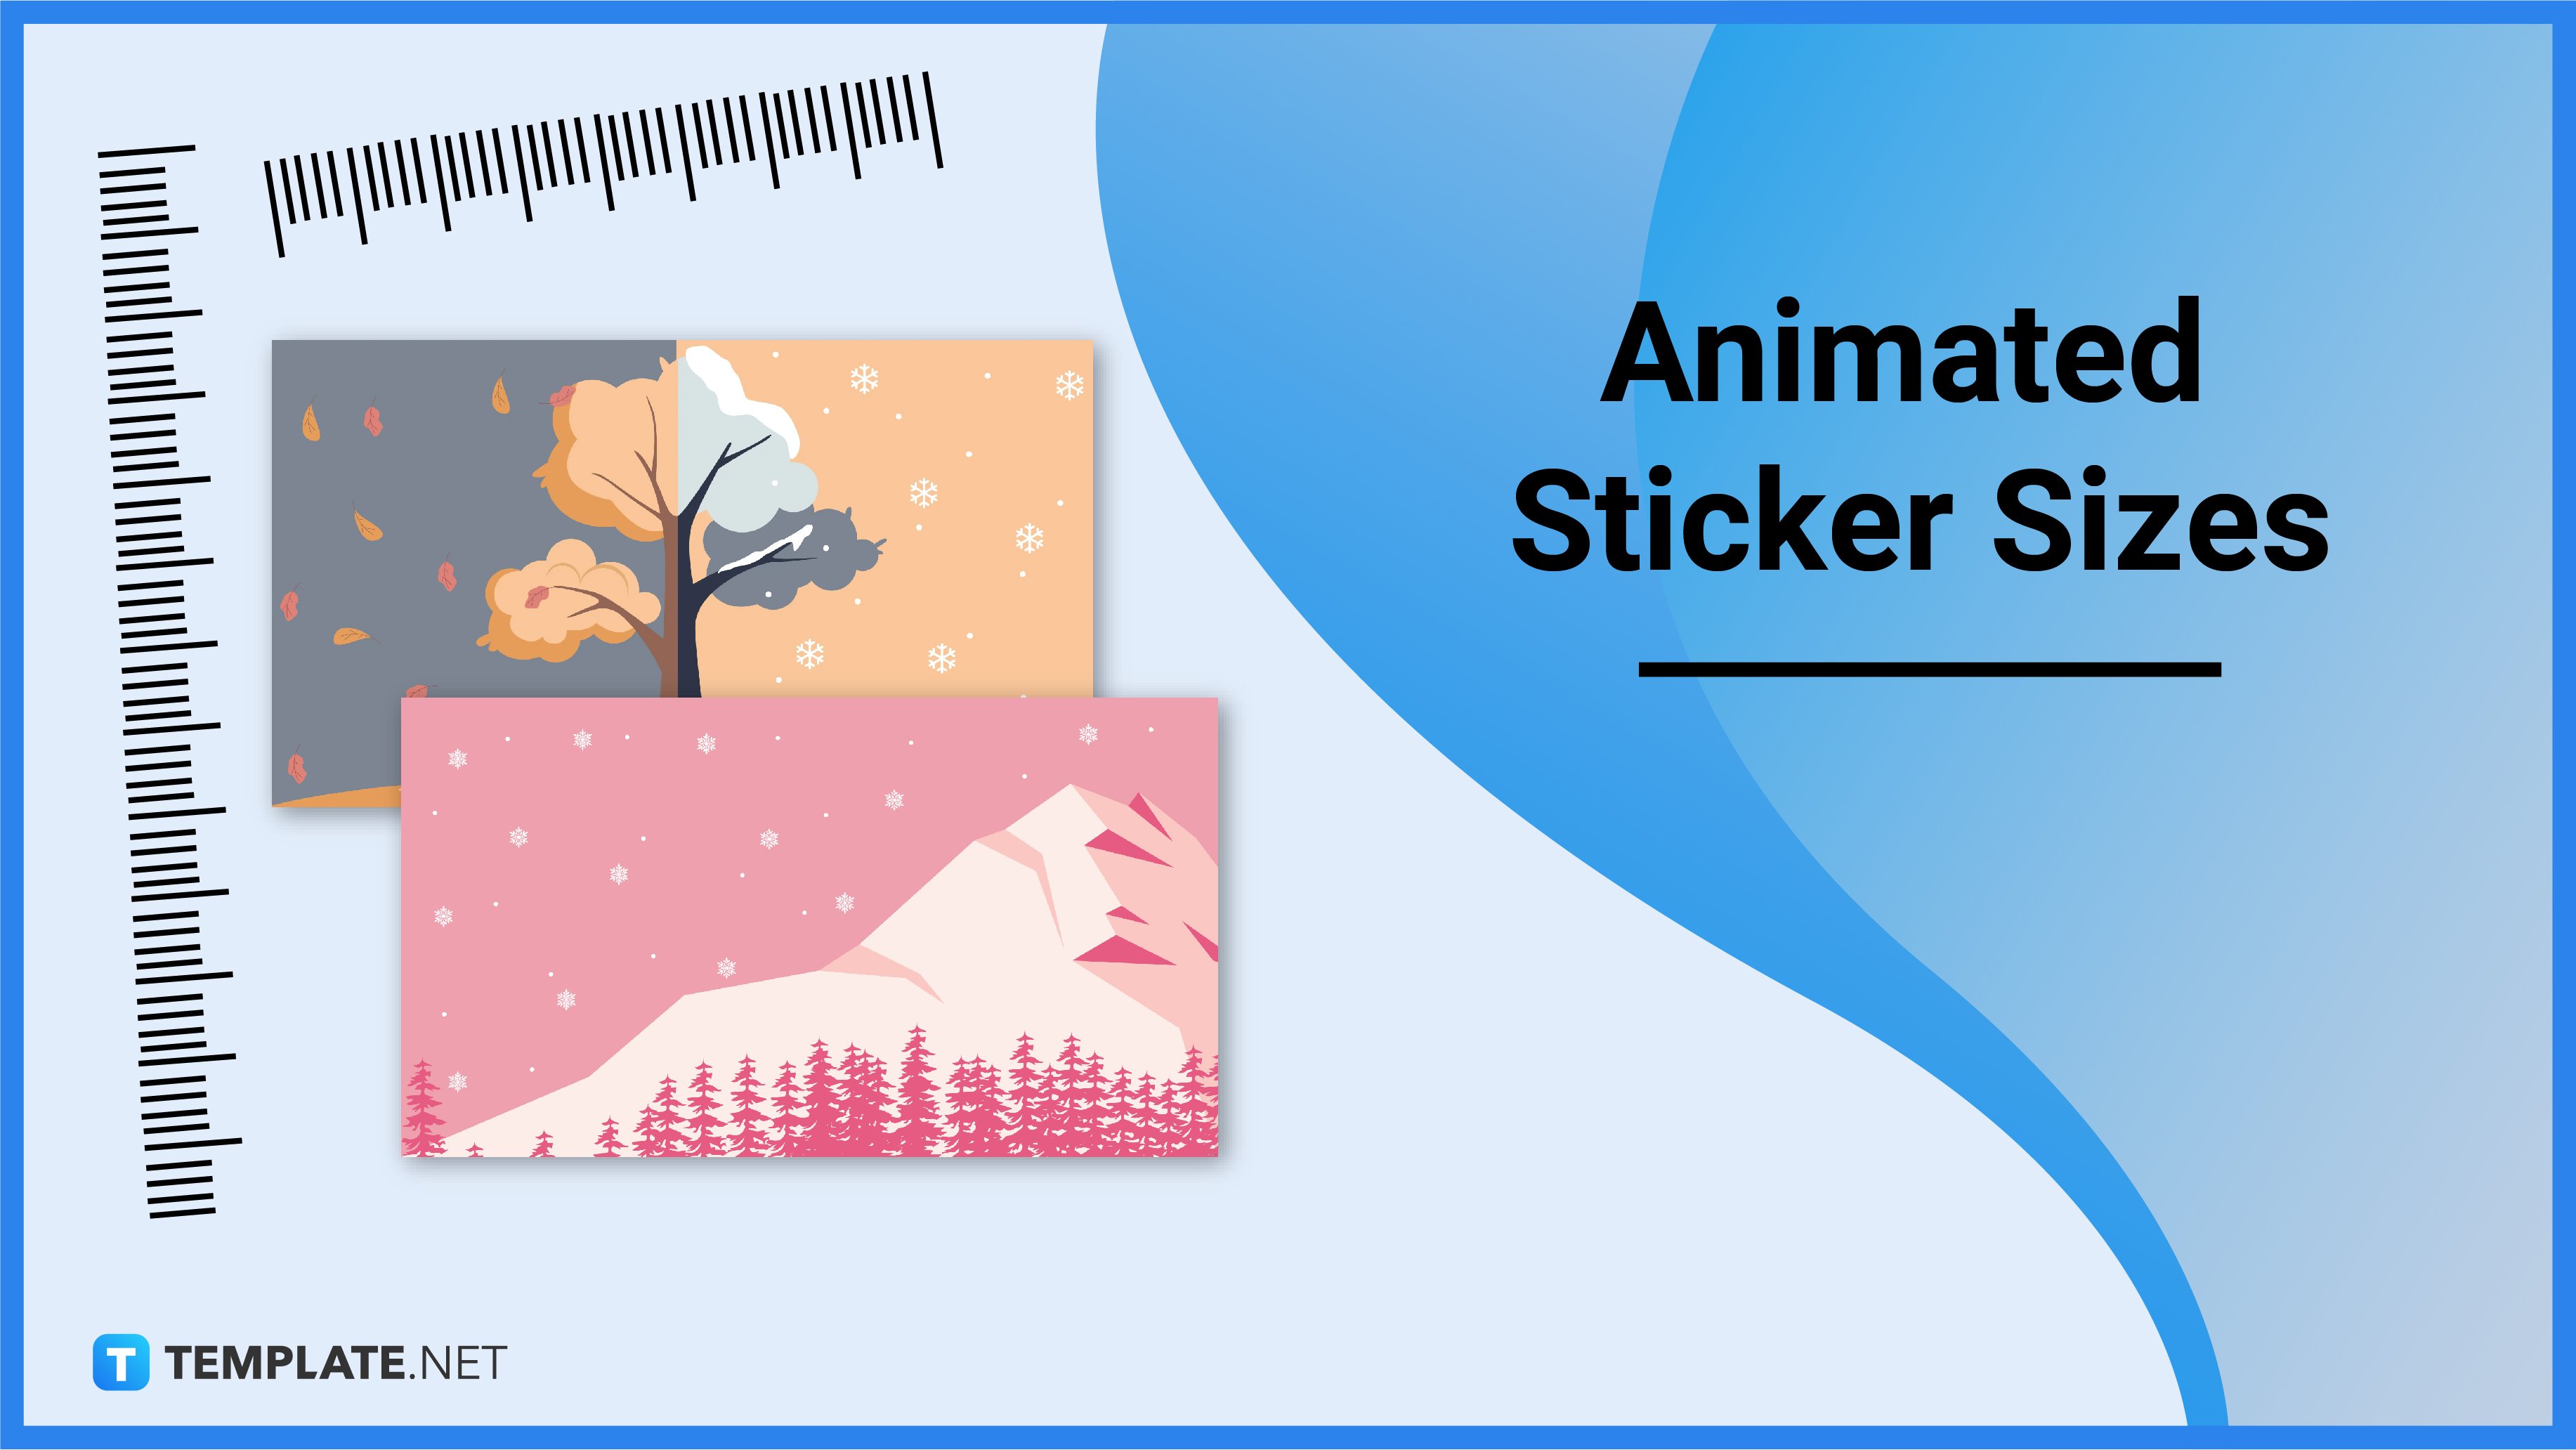 Animated Sticker Size - Dimension, Inches, mm, cms, Pixel